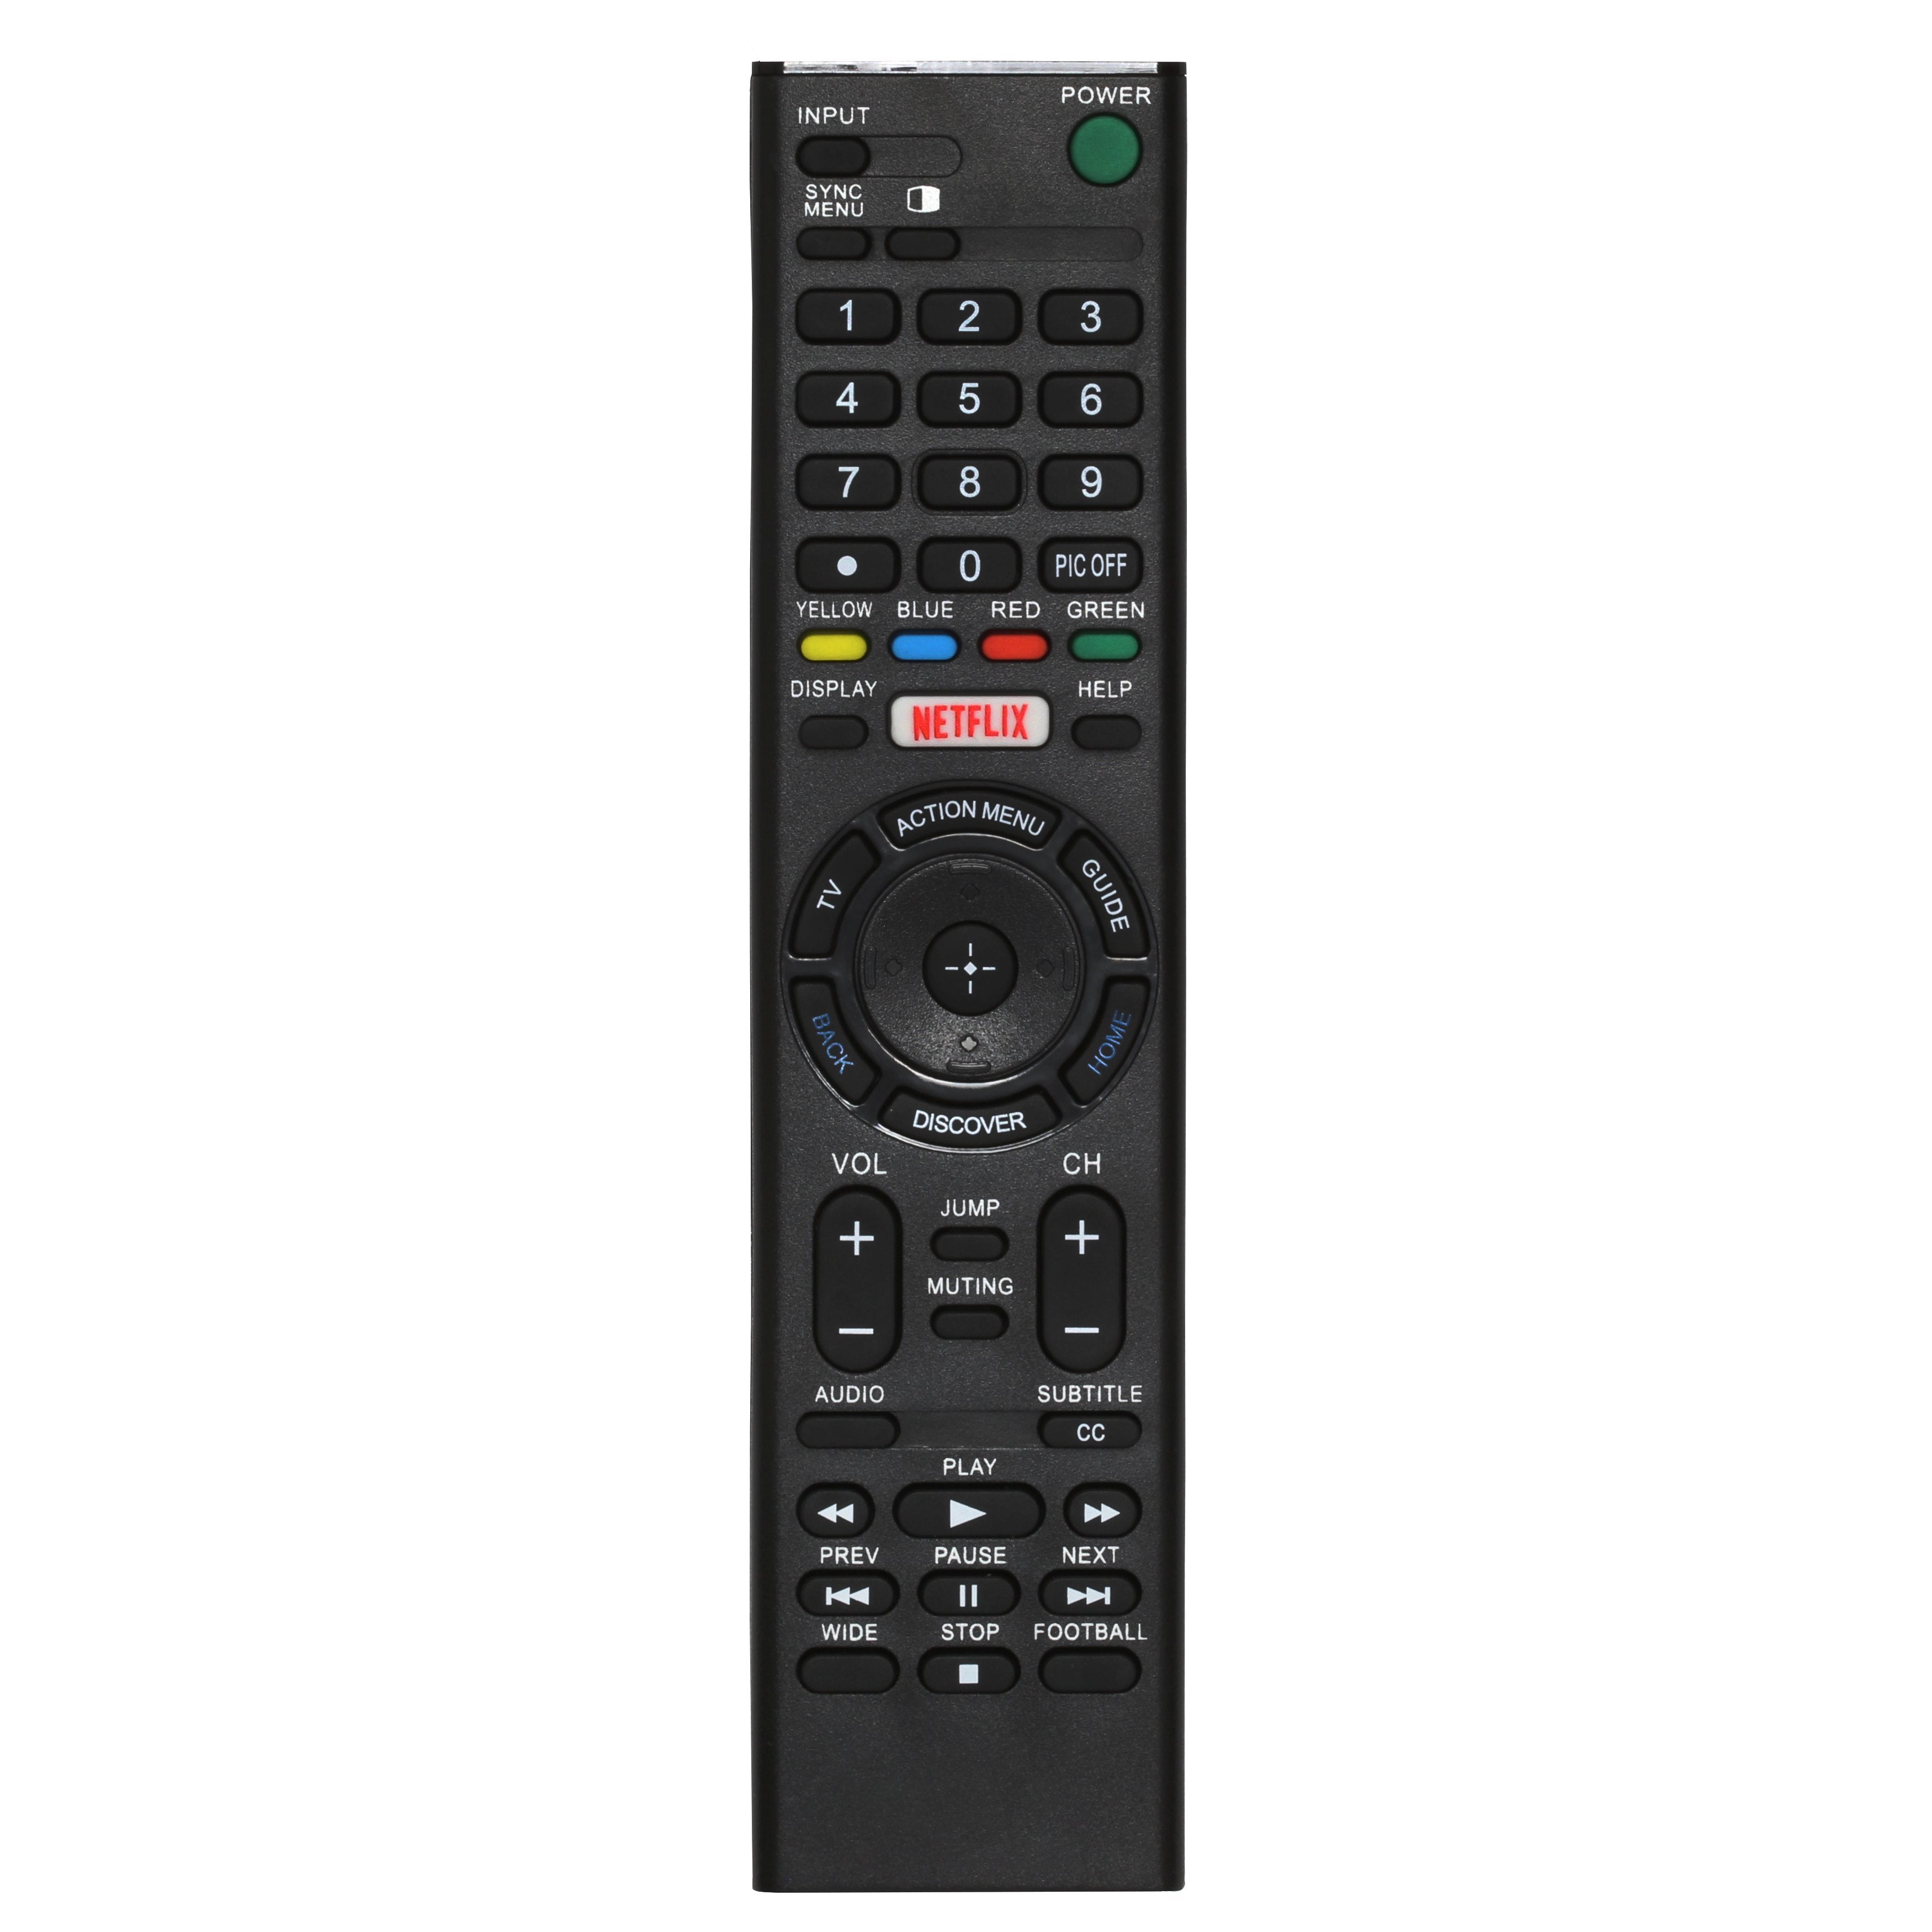 Sony KDL46XBR8 Replacement TV Remote Control